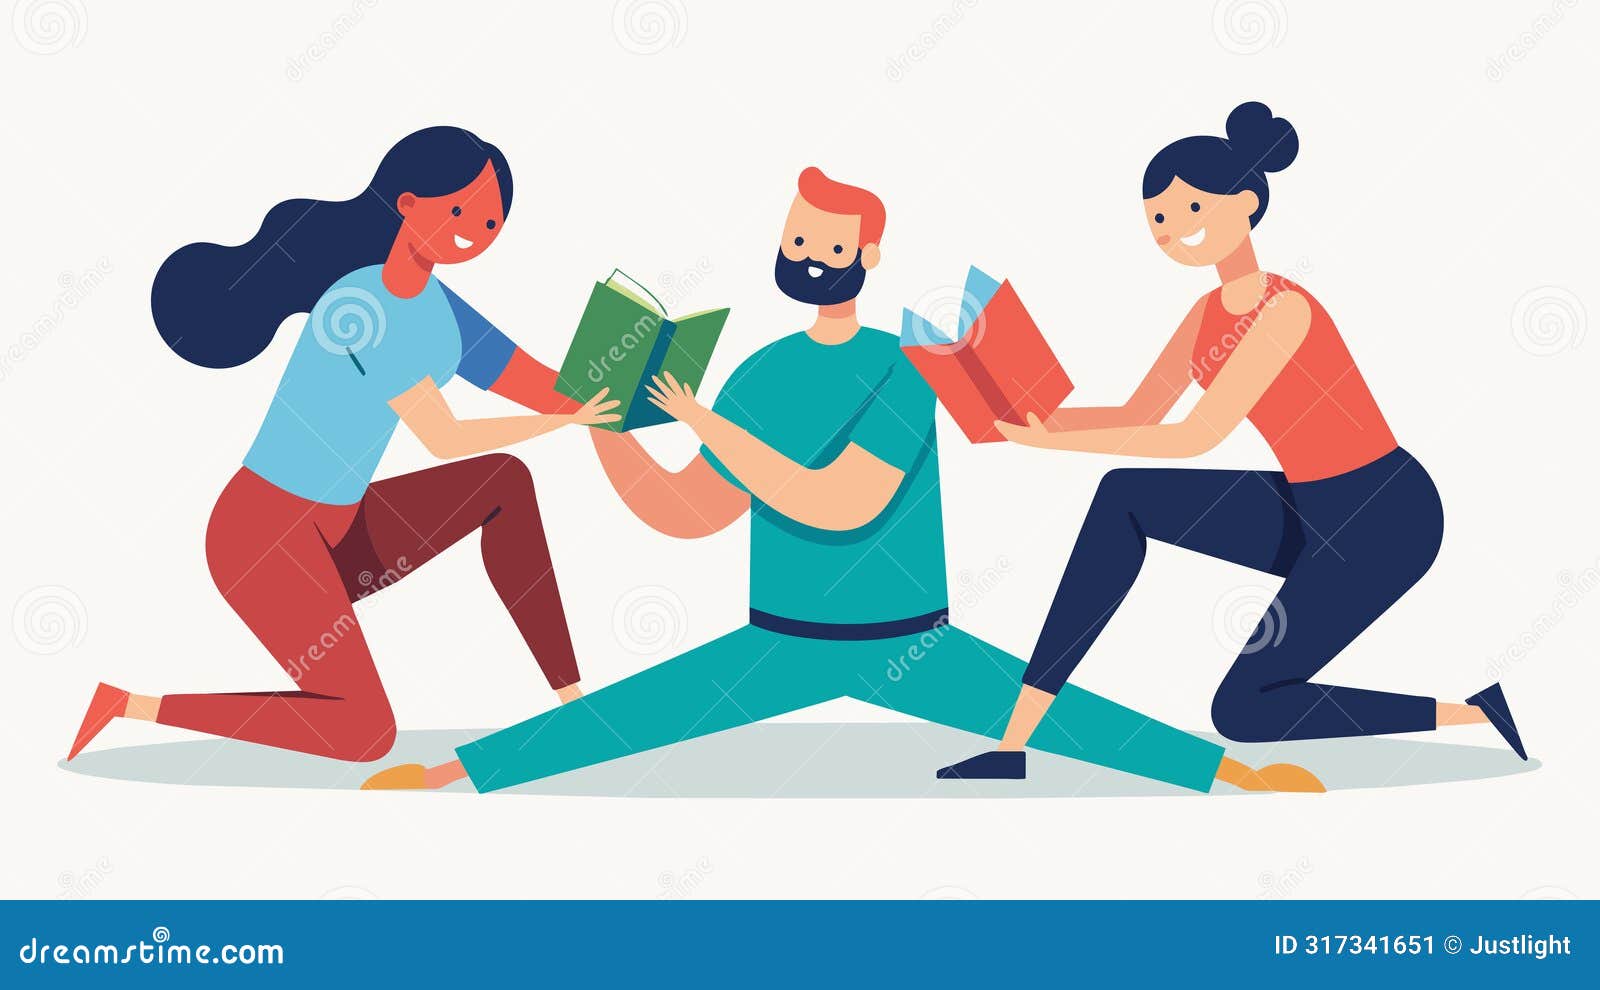 the book clubs stretch breaks are not only a chance to loosen up stiff muscles but also a time for members to connect